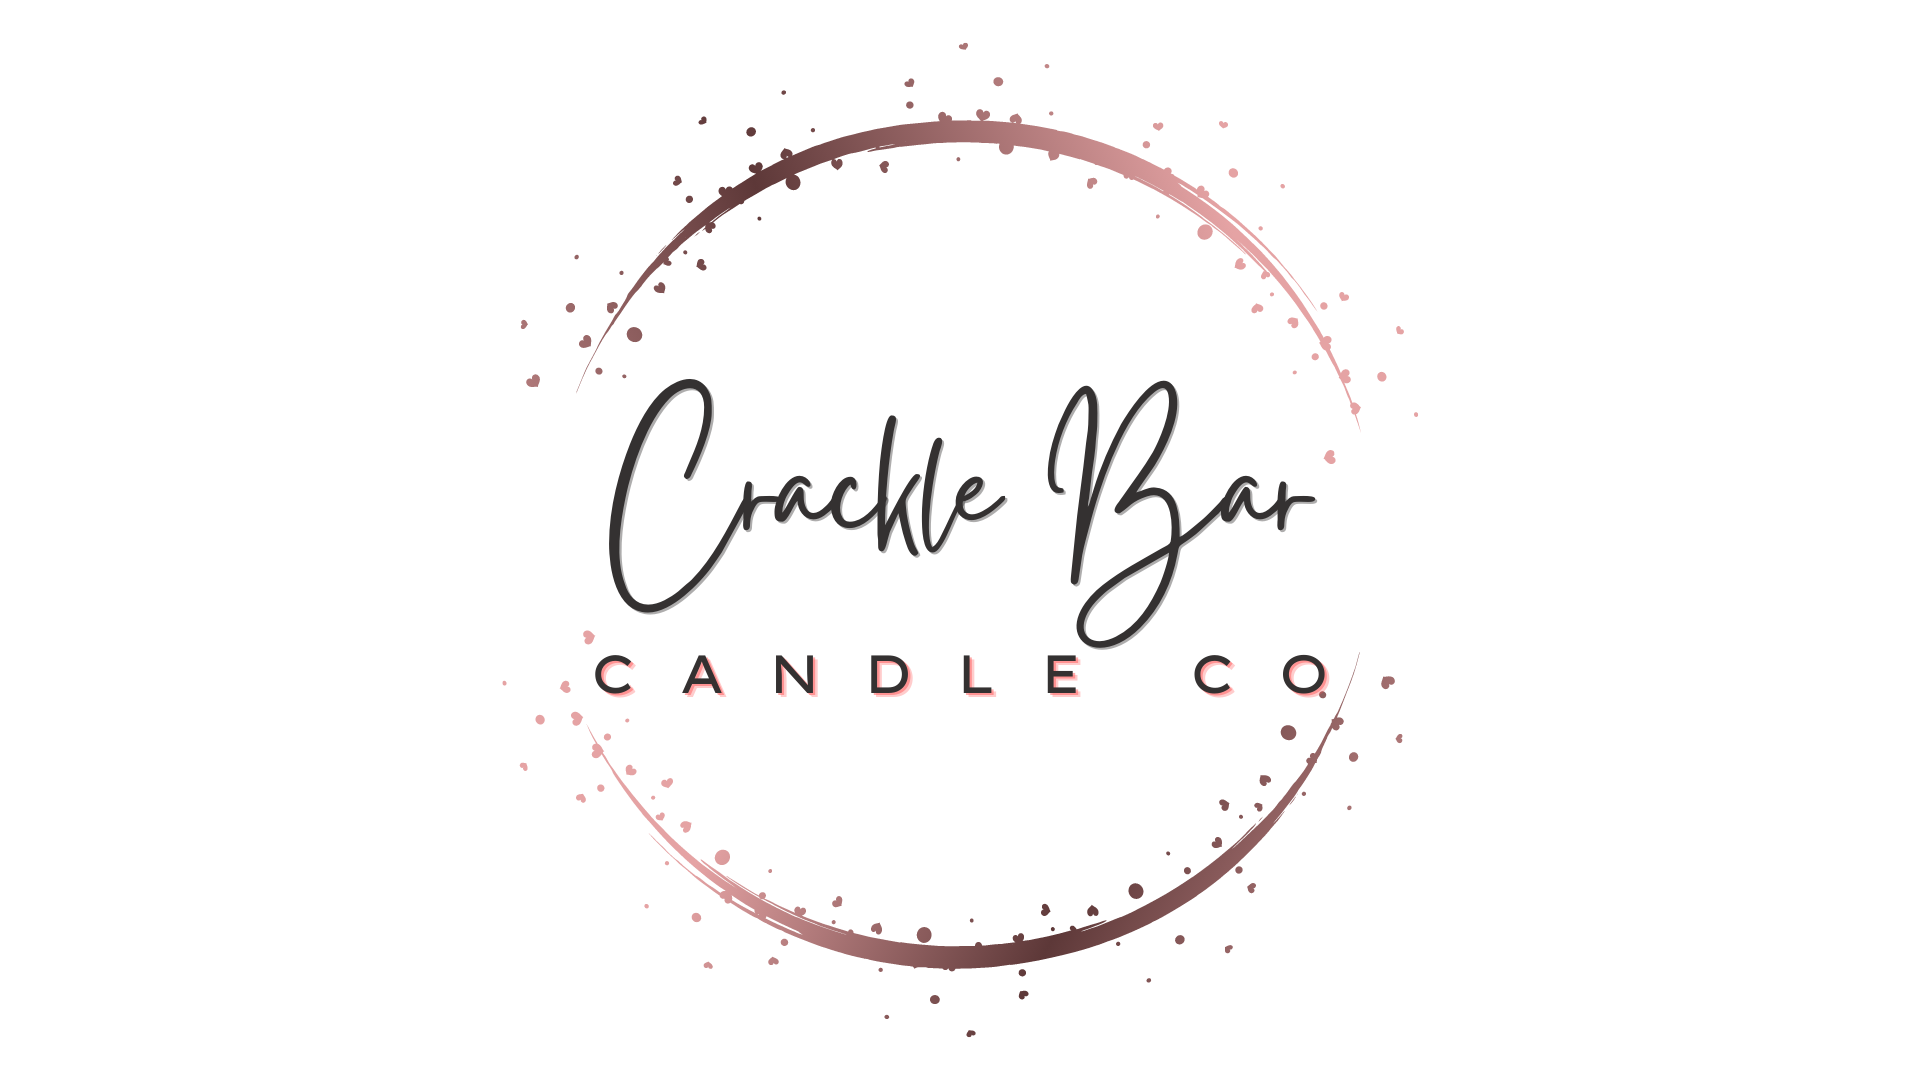 Crackle Bar Candle Co